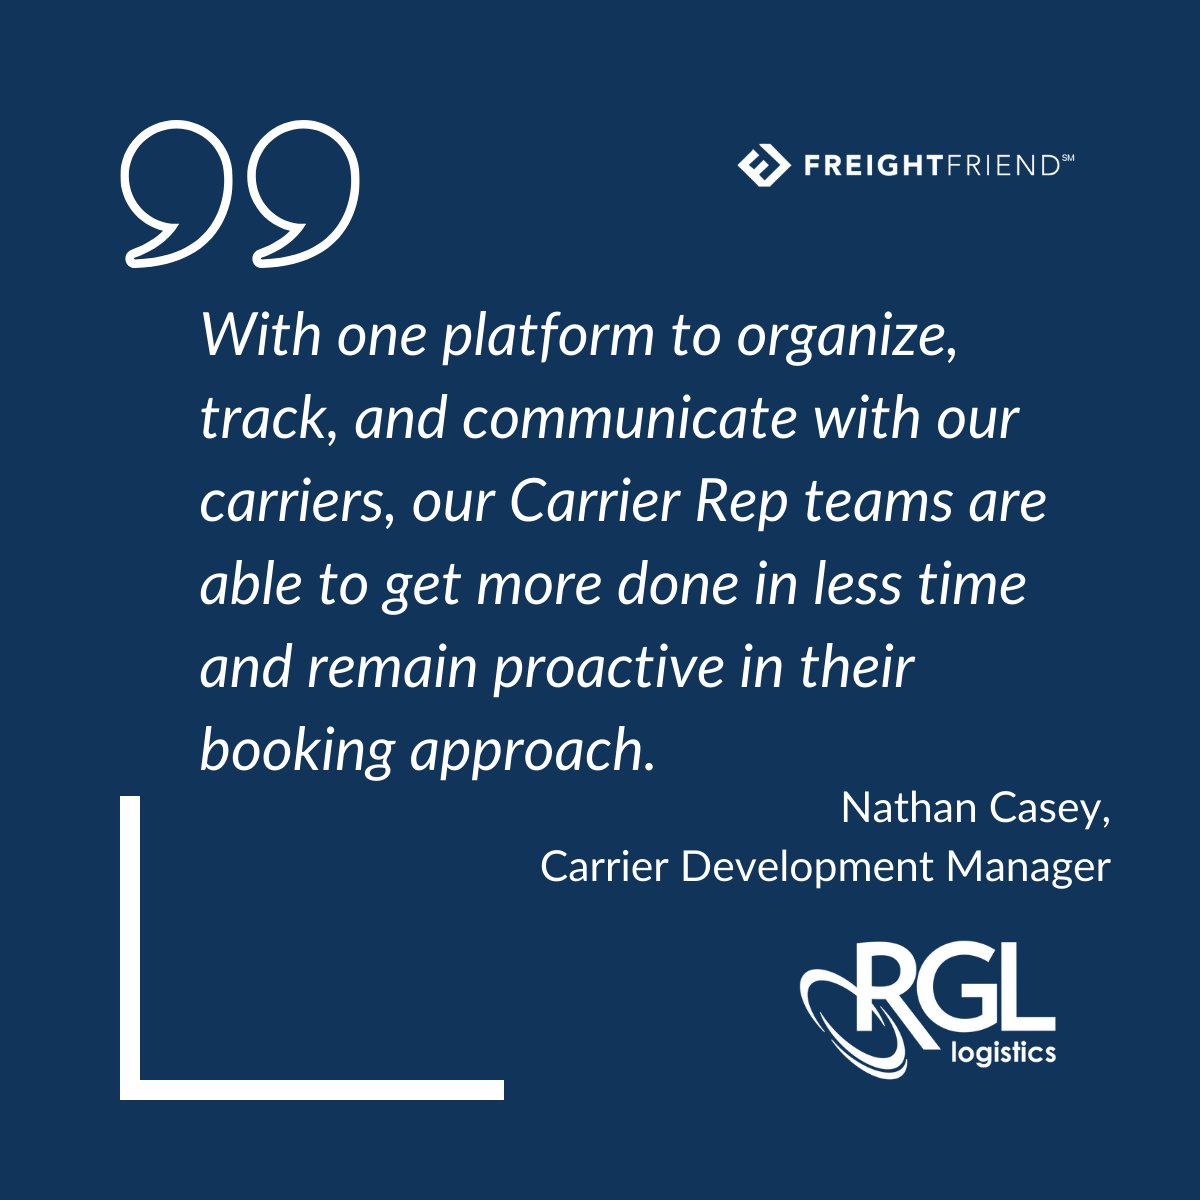 RGL Logistics needed to increase carrier interactions, expand the carrier base, and more efficiently book bids with carriers in less time. See how they did it here: lnkd.in/dWGjF3BP
#relationshipsmatter #freight #transportationindustry #logistics